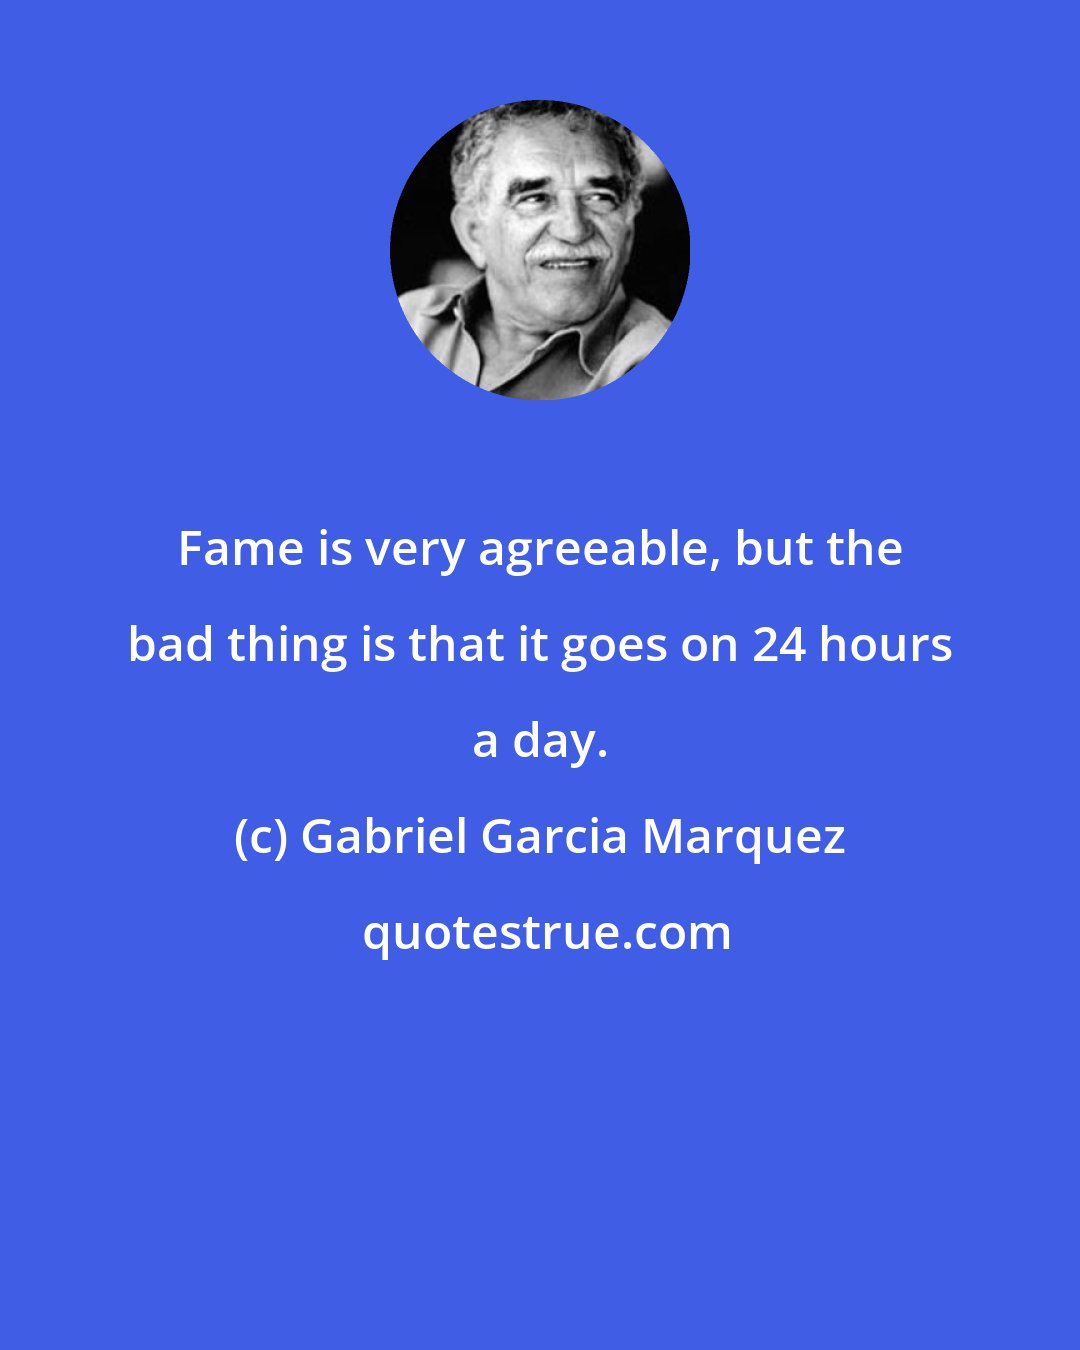 Gabriel Garcia Marquez: Fame is very agreeable, but the bad thing is that it goes on 24 hours a day.